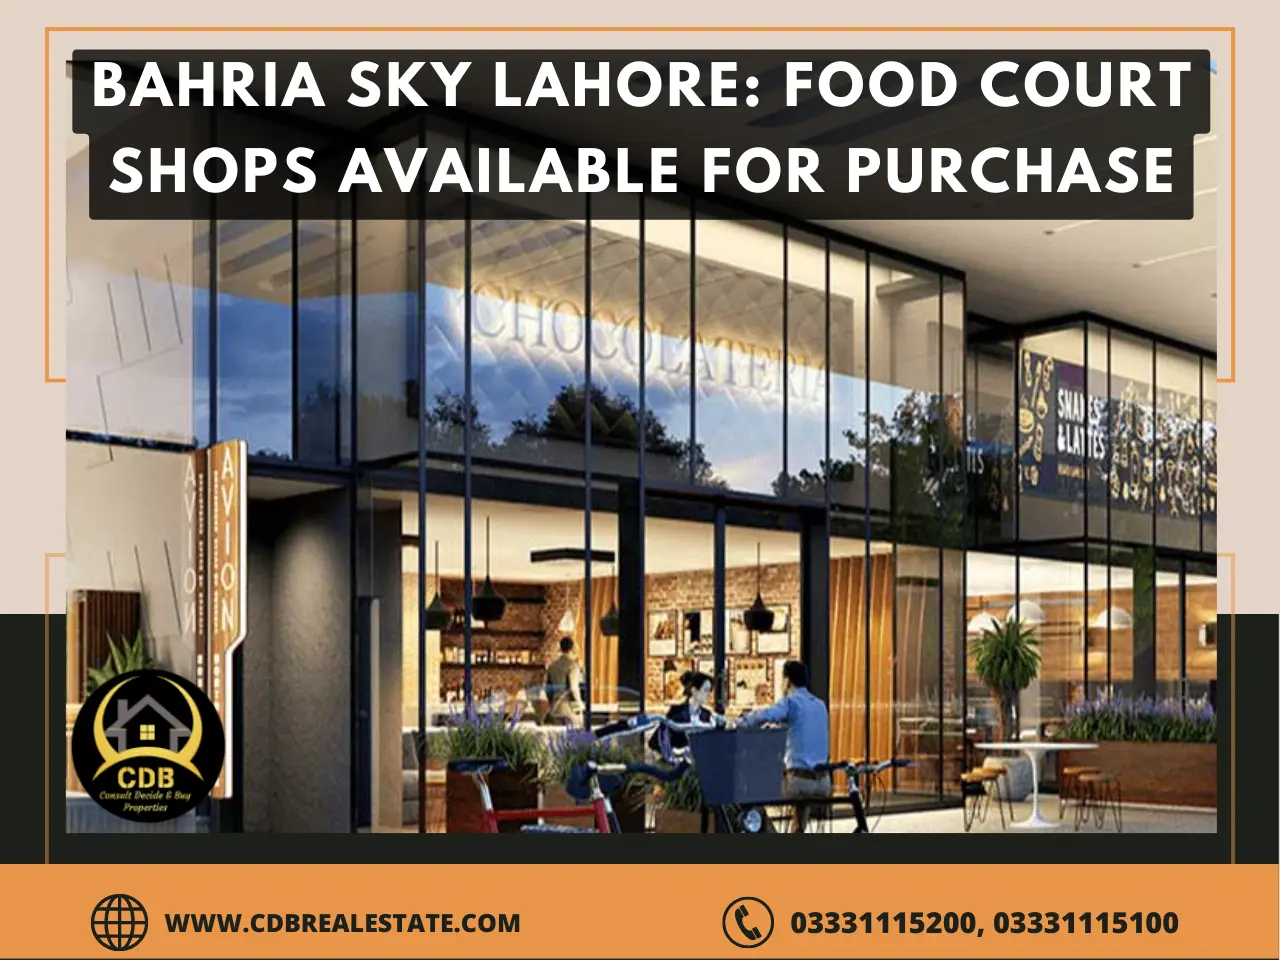 Bahria Sky Lahore Food Court Shops Available for Purchase